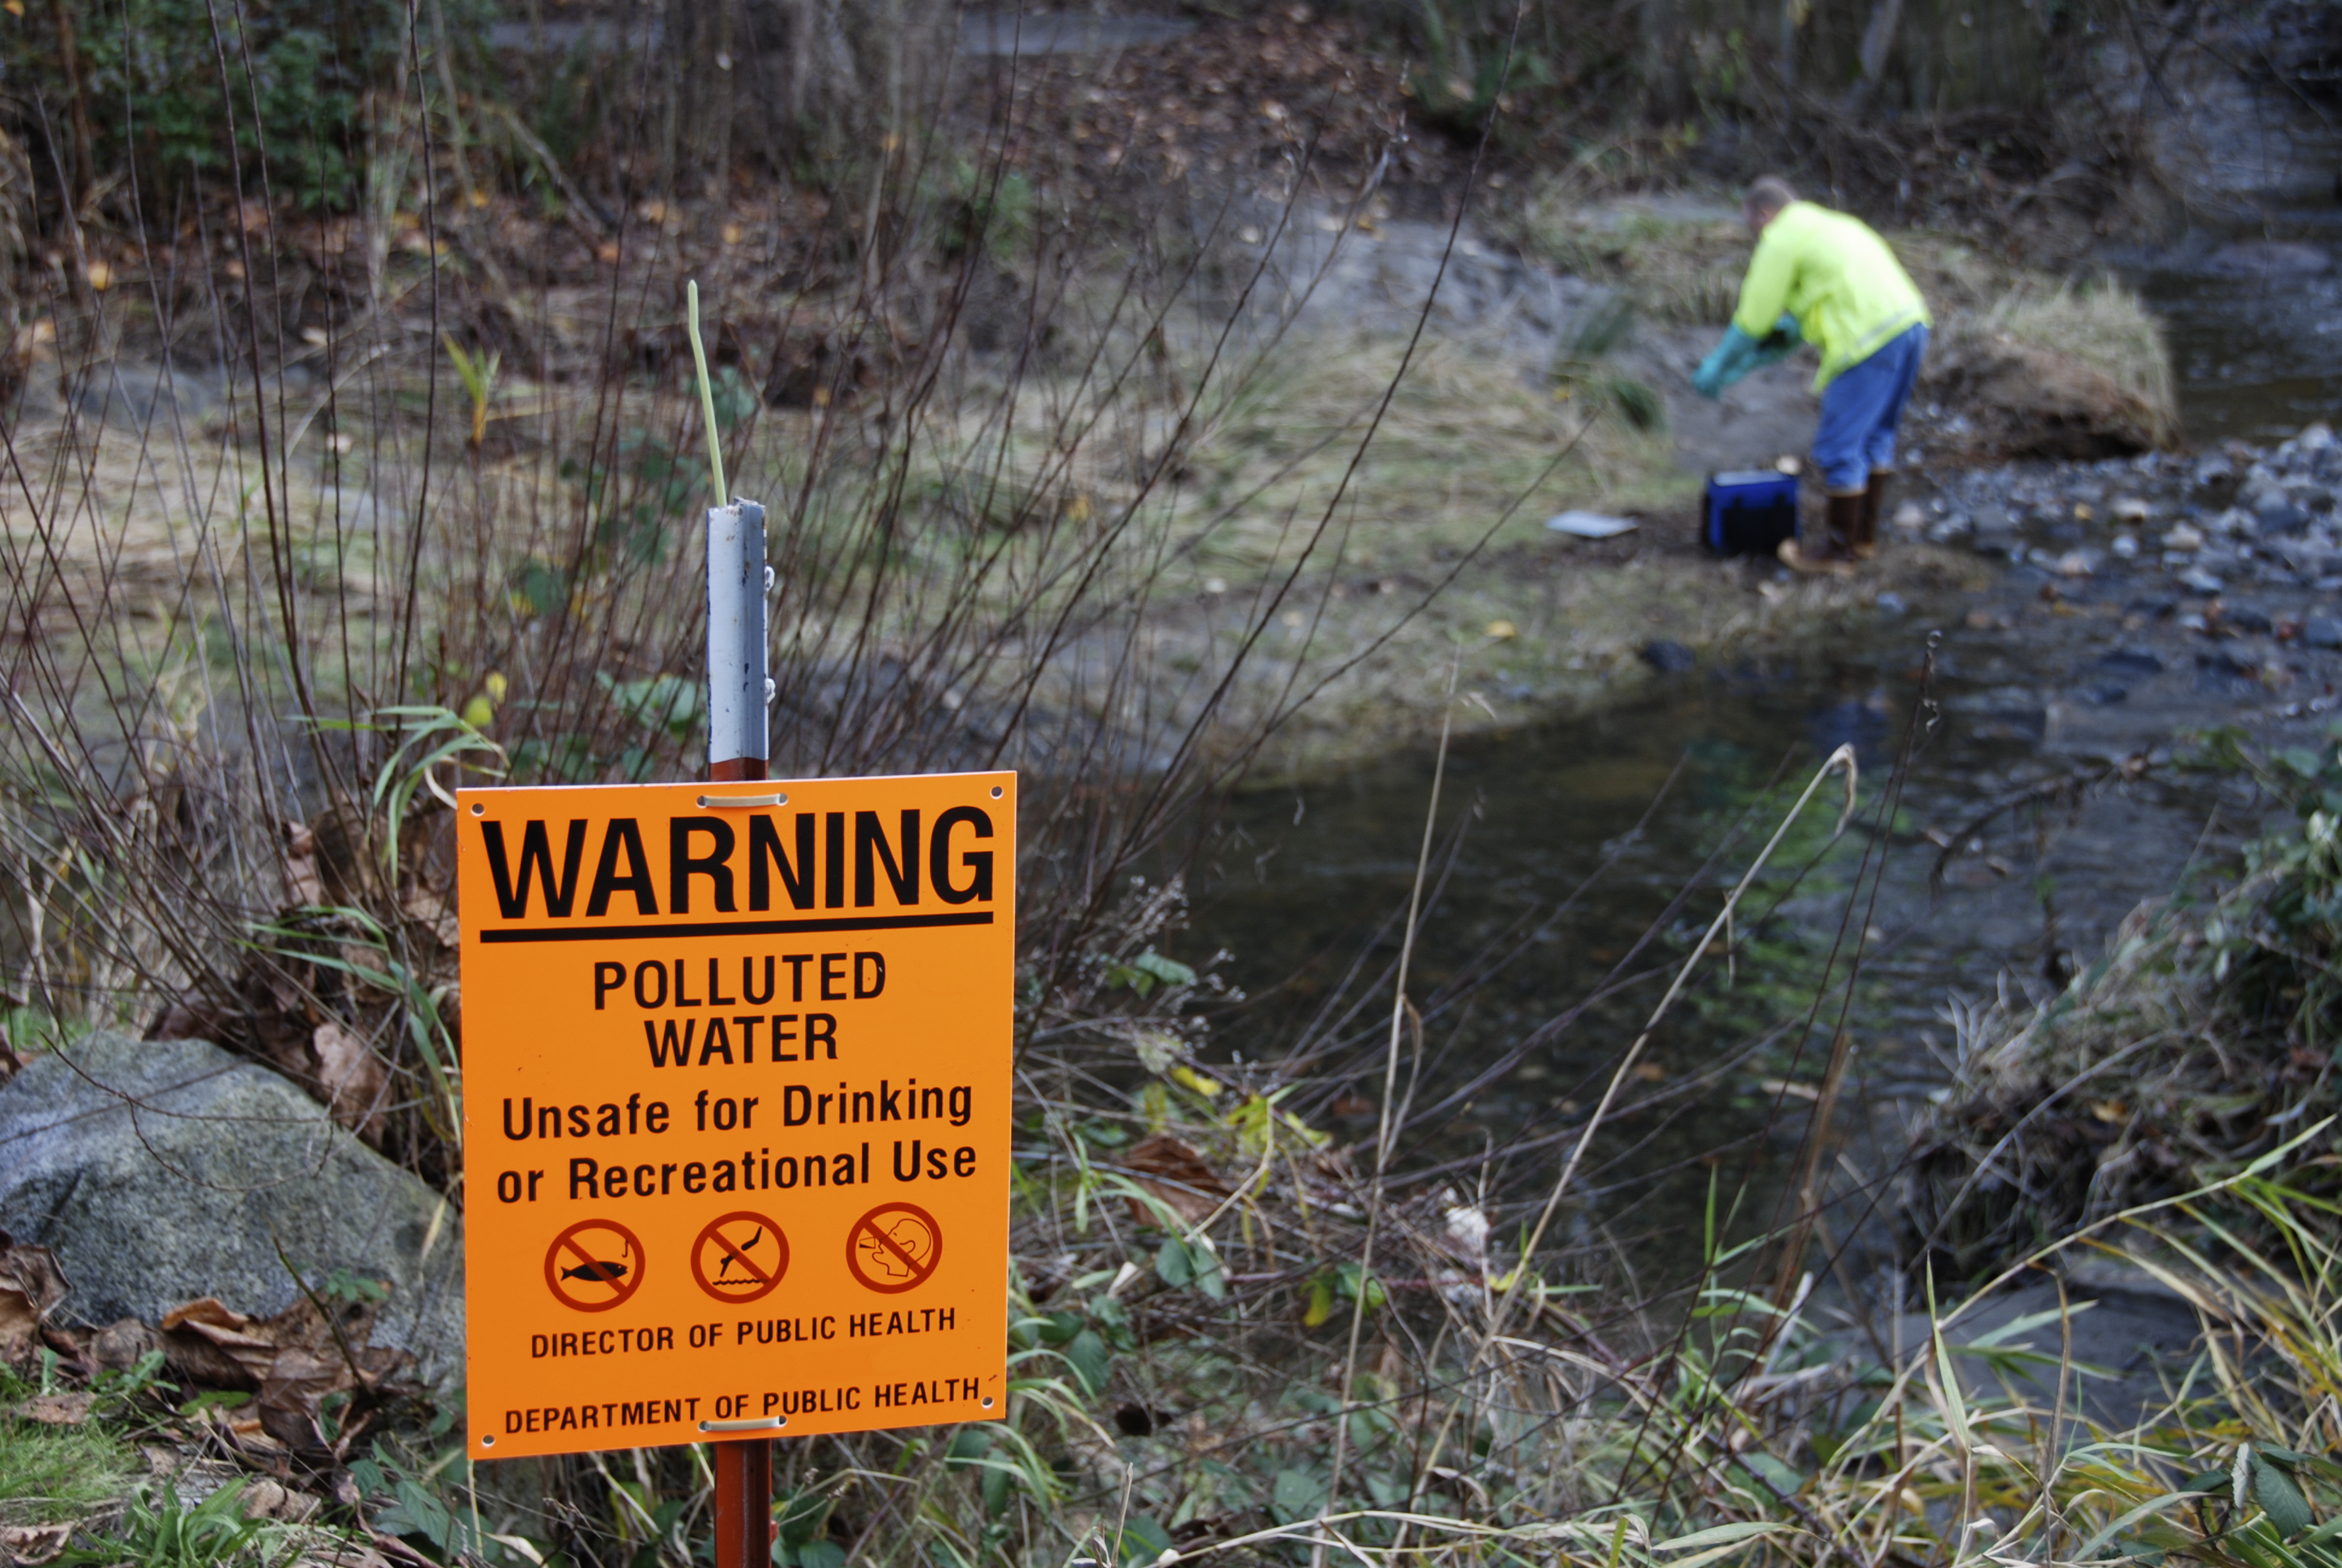 A person working in a river with a polluted water sign in the foreground